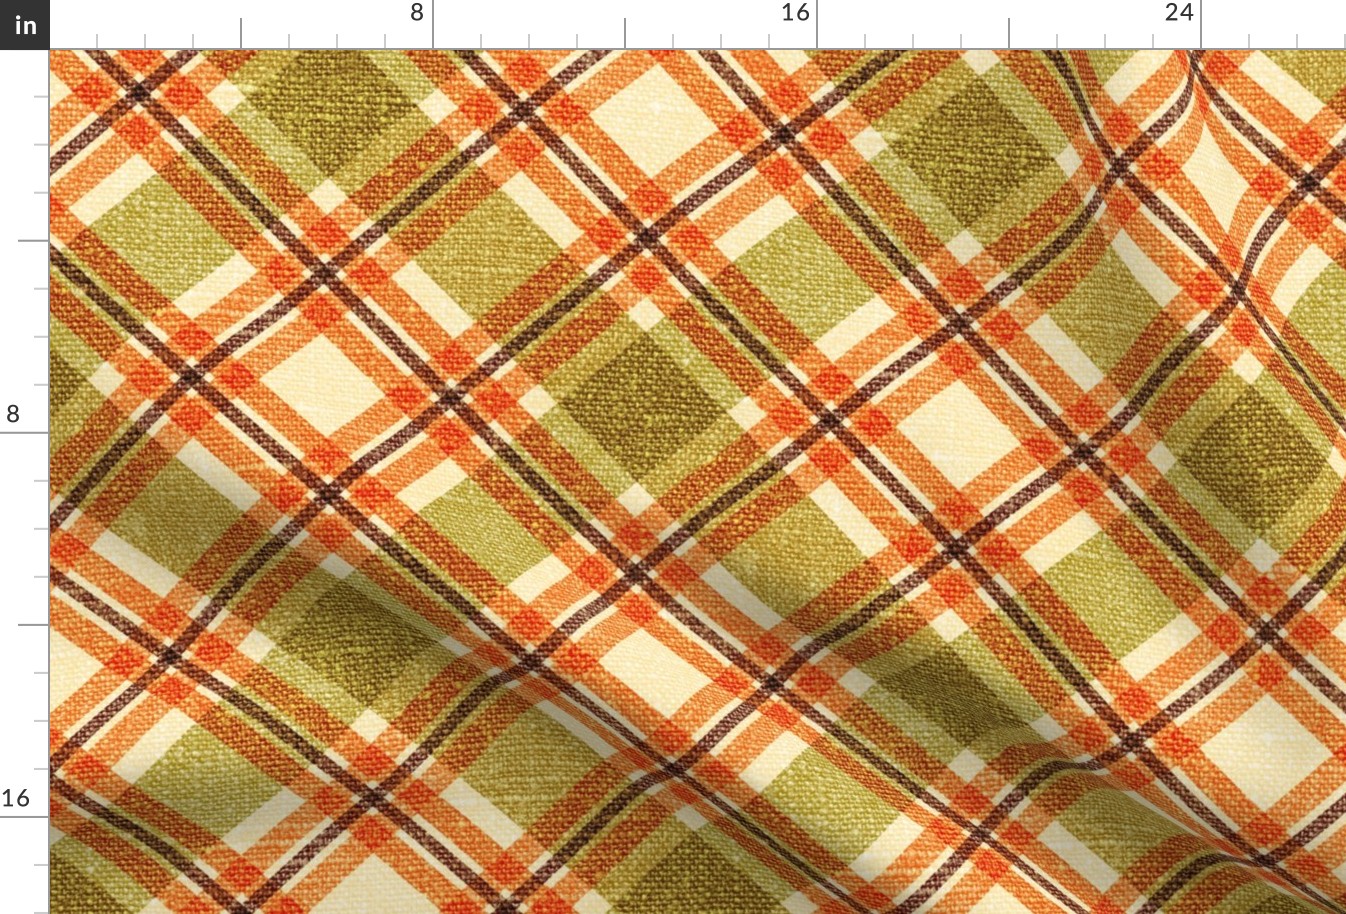 Fall Plaid with Texture 1 - large scale